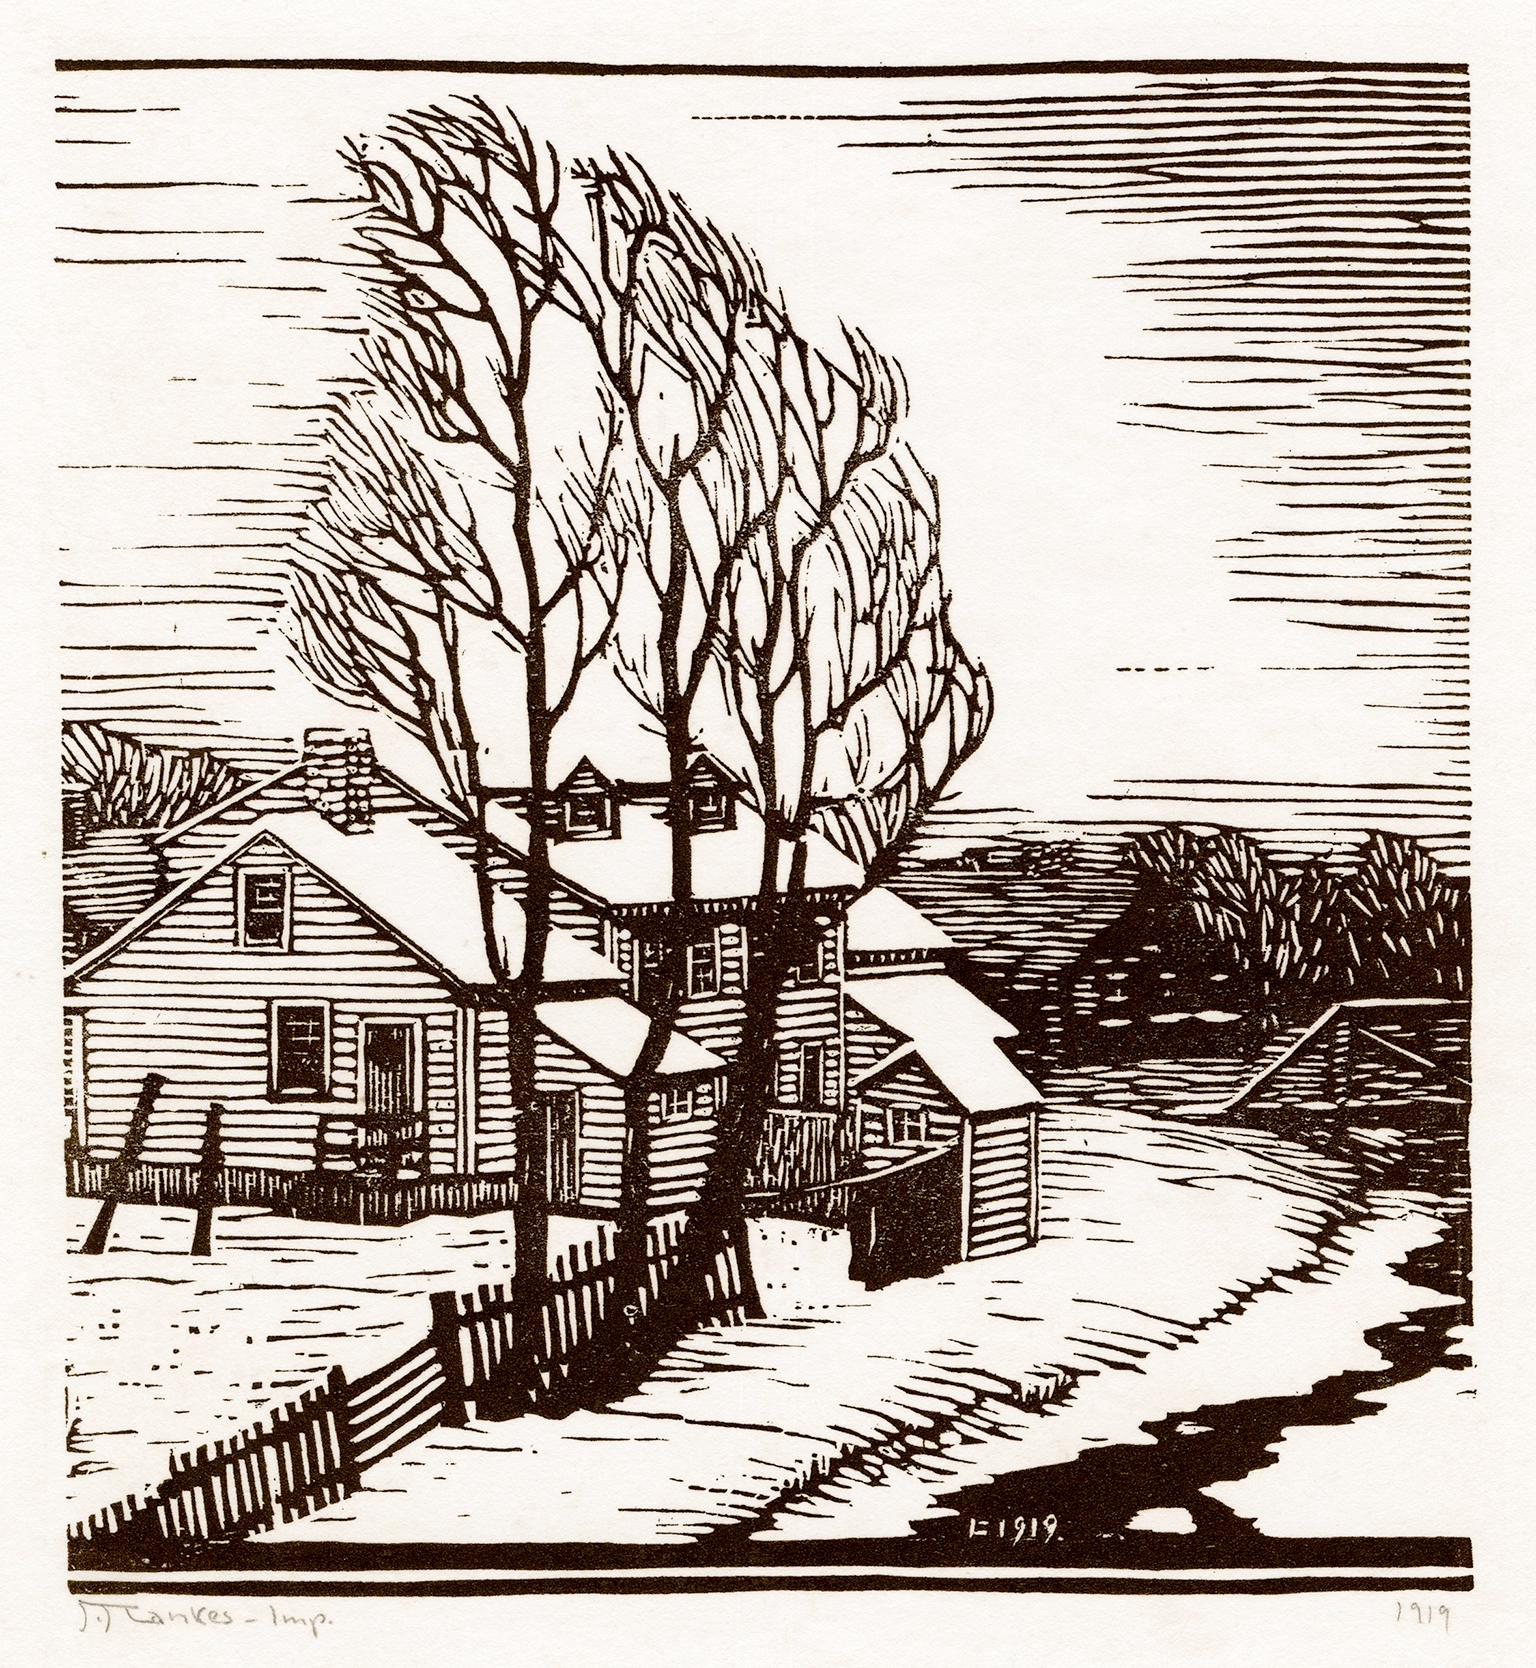 'Cottage in Winter' — Early 20th-Century Arts and Crafts